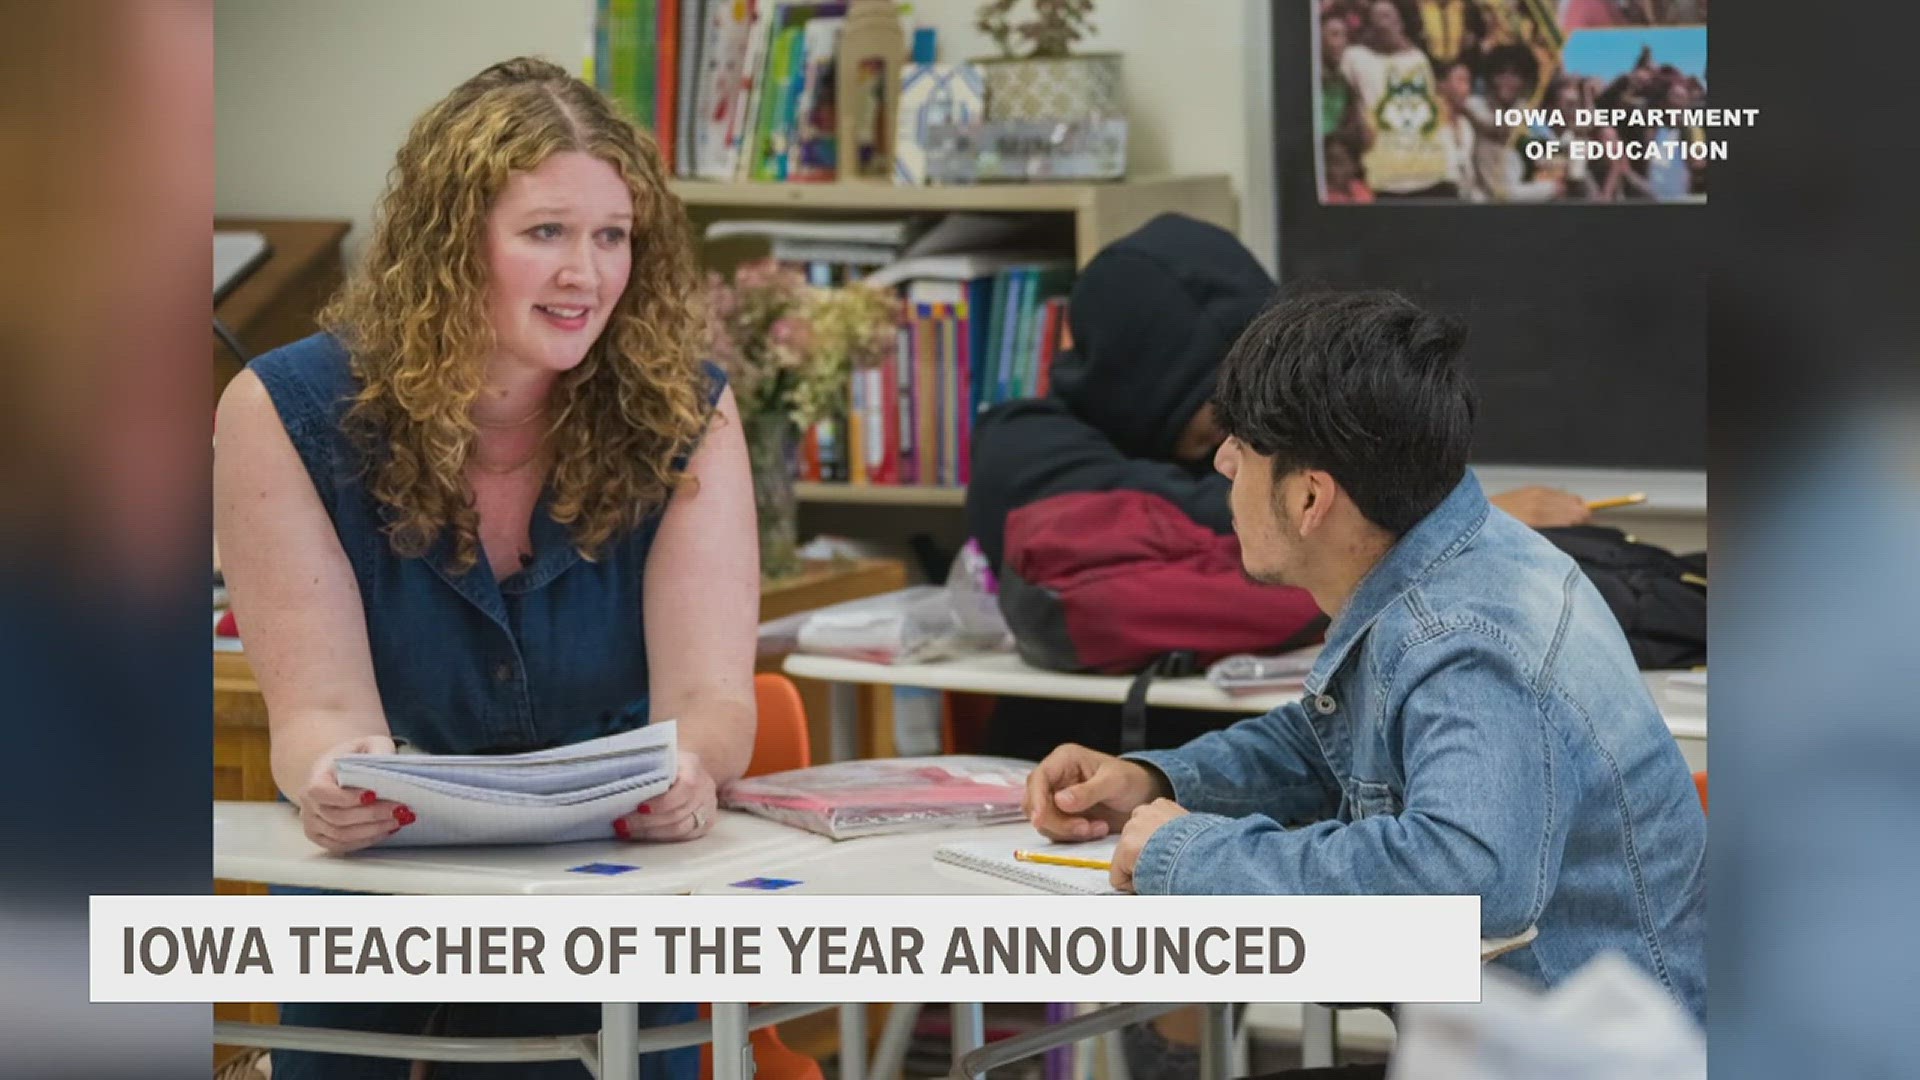 Ann Mincks is a high school teacher at Hoover High School. This year she's been selected as the 2024 Iowa Teacher of the Year for her excellence in the classroom.